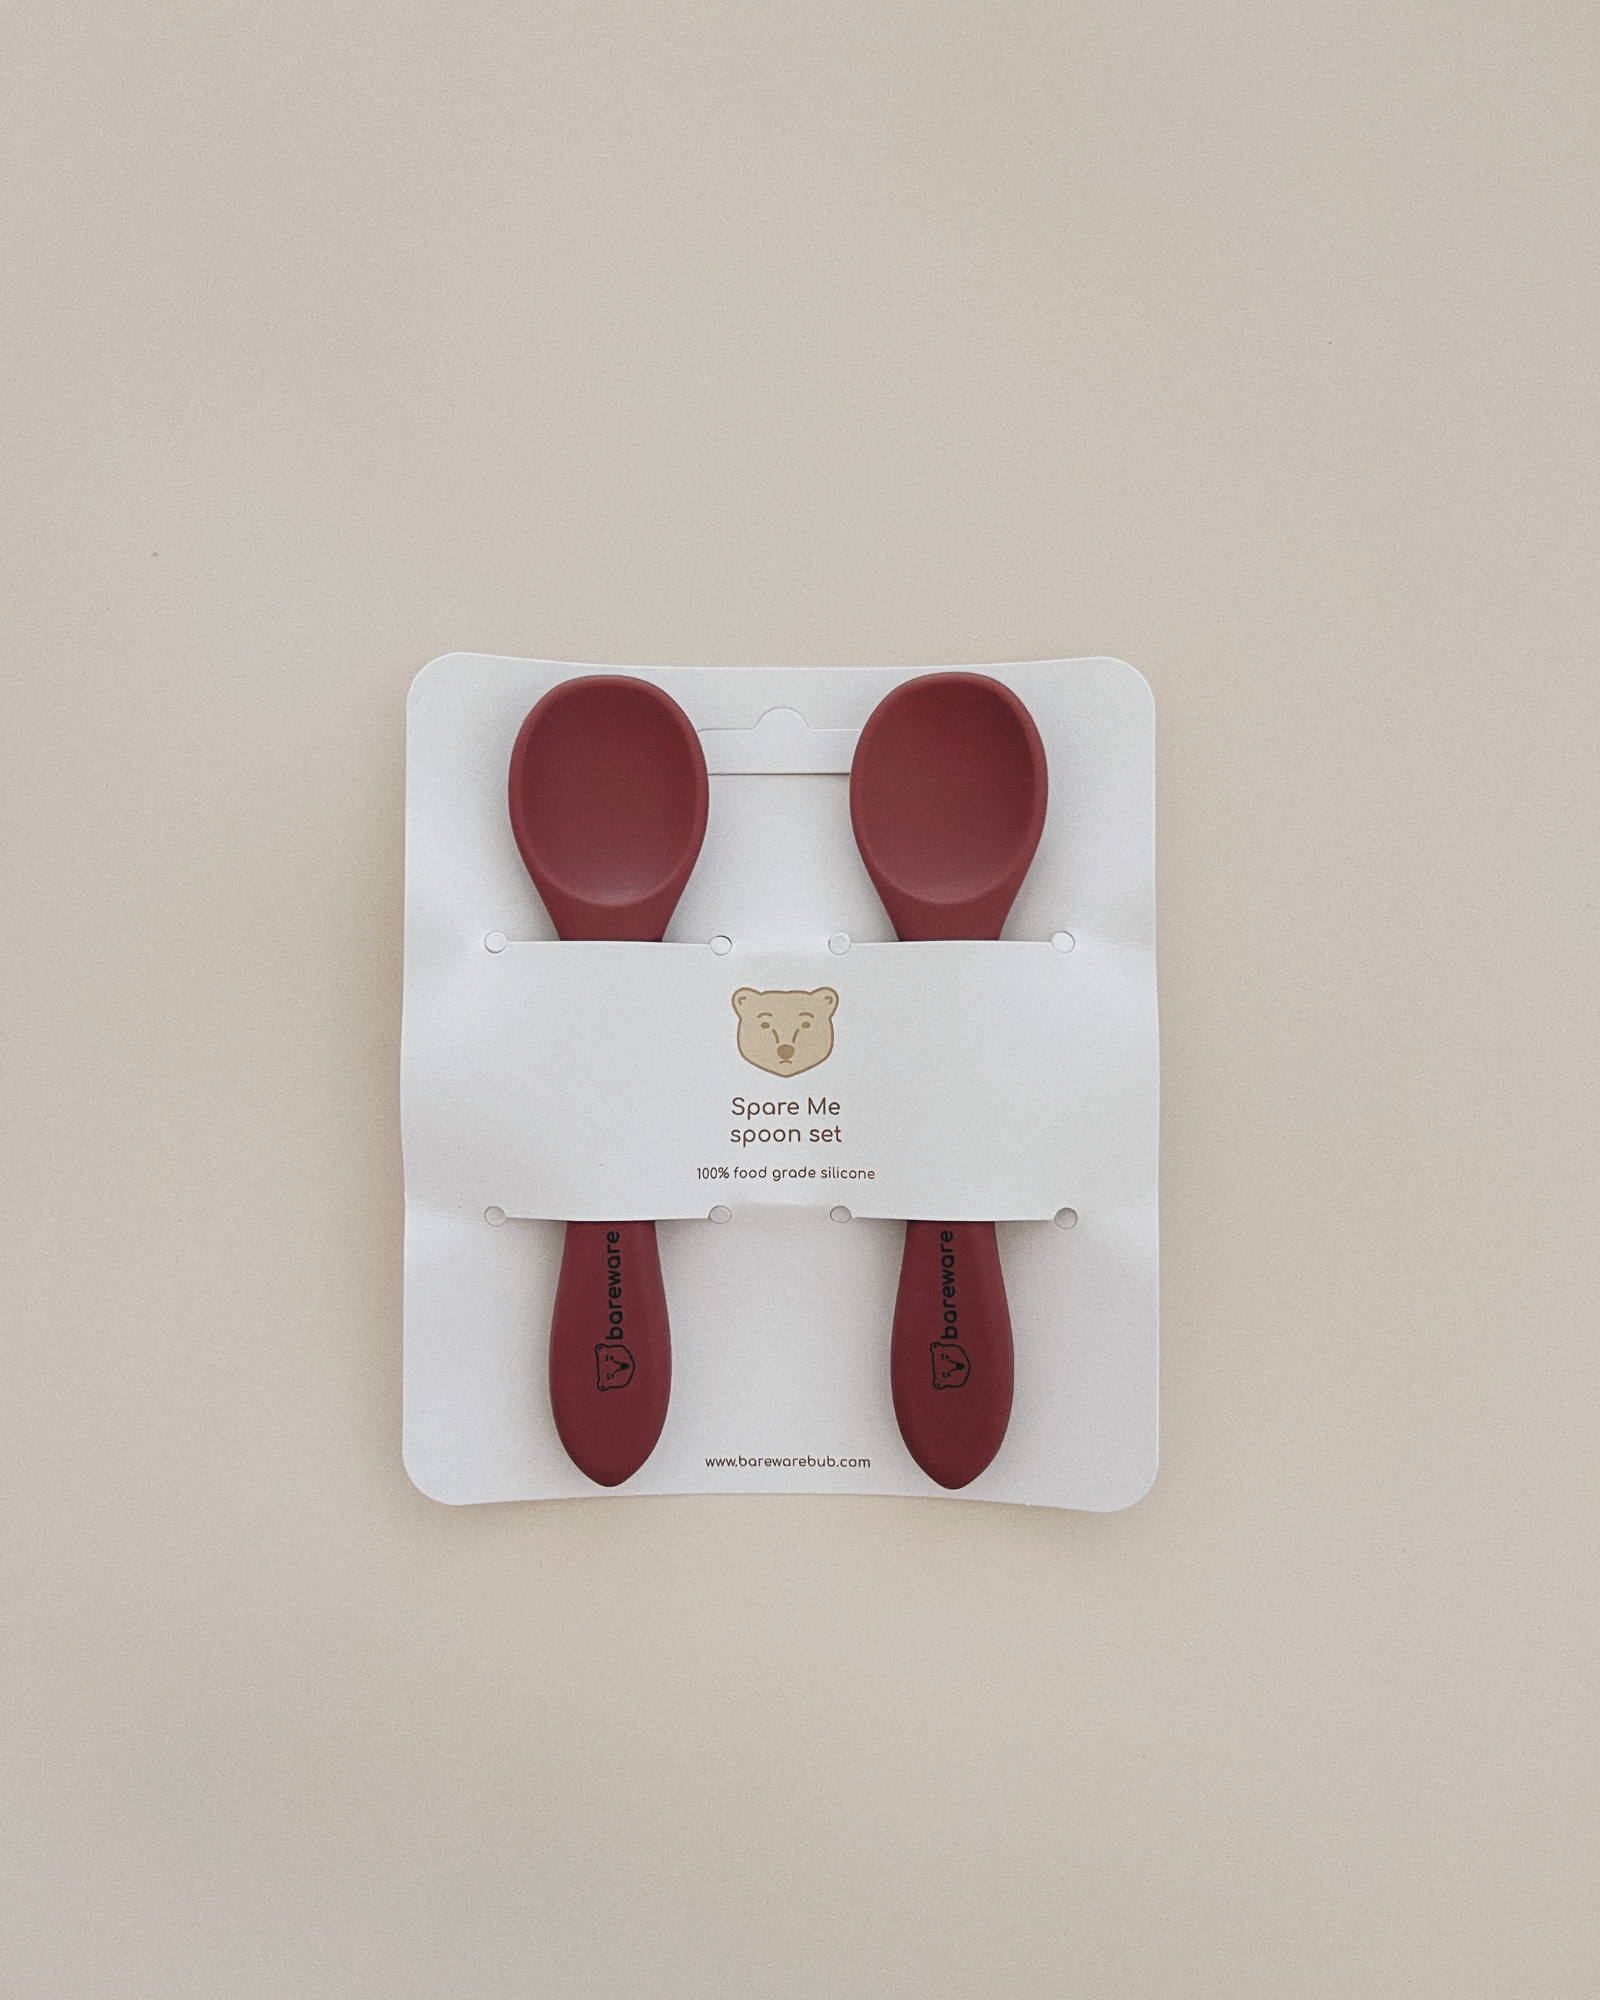 Spare Me | Spoon set. Mulberry